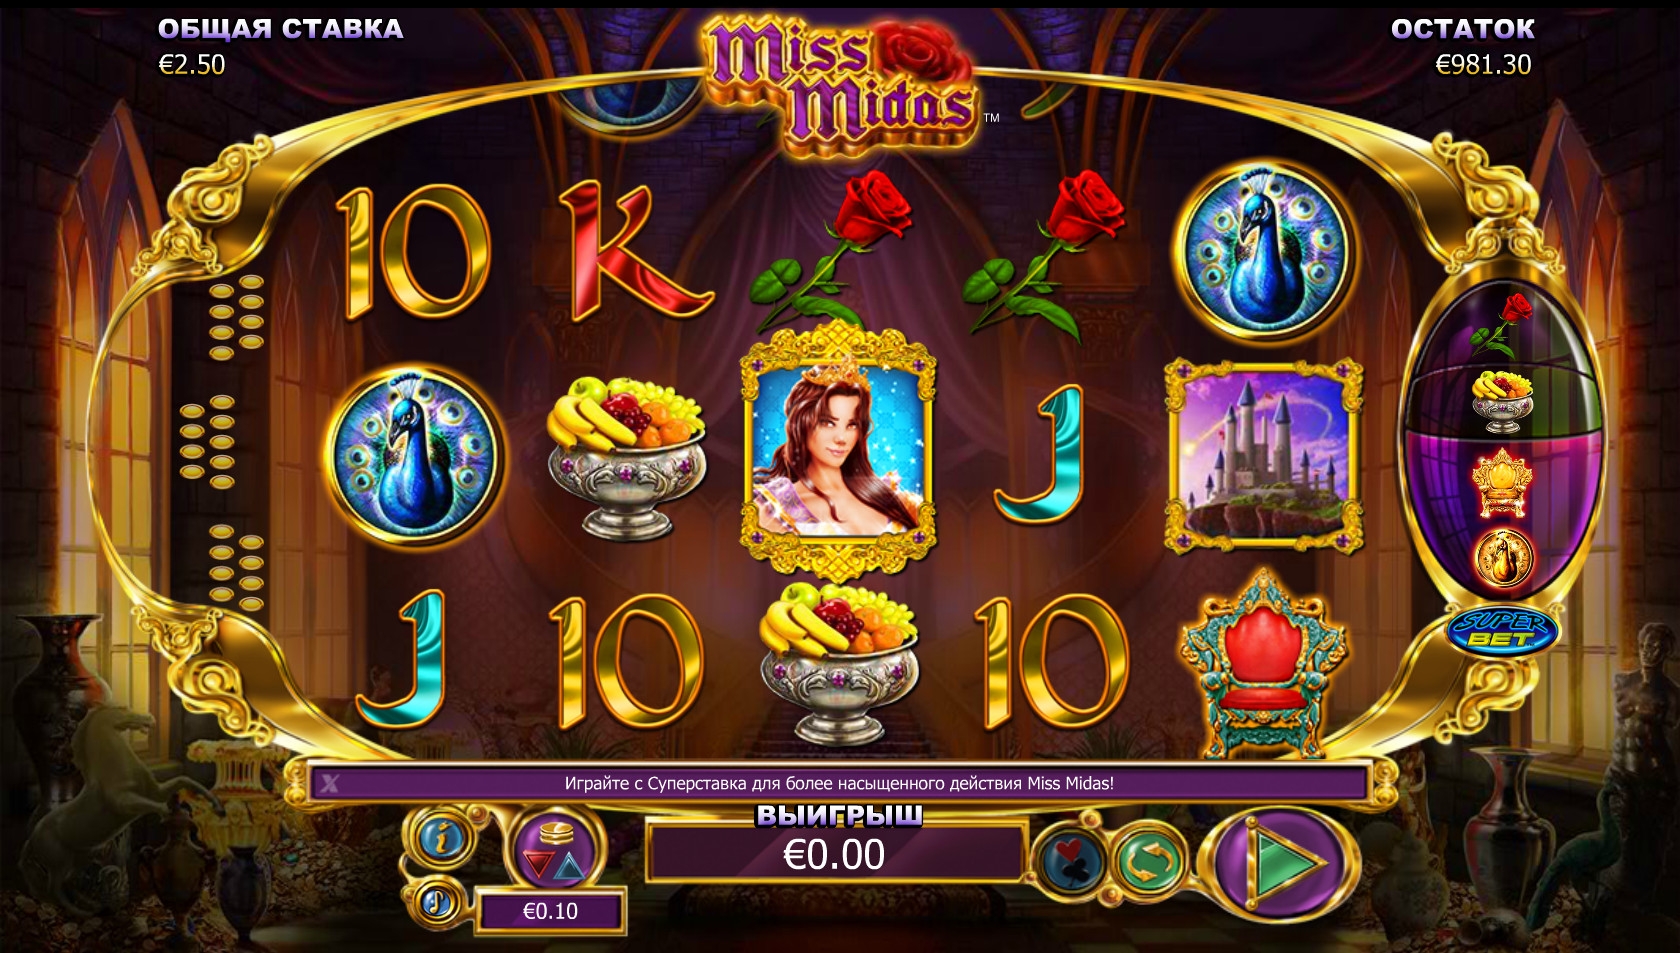 Miss Midas (Miss Midas) from category Slots